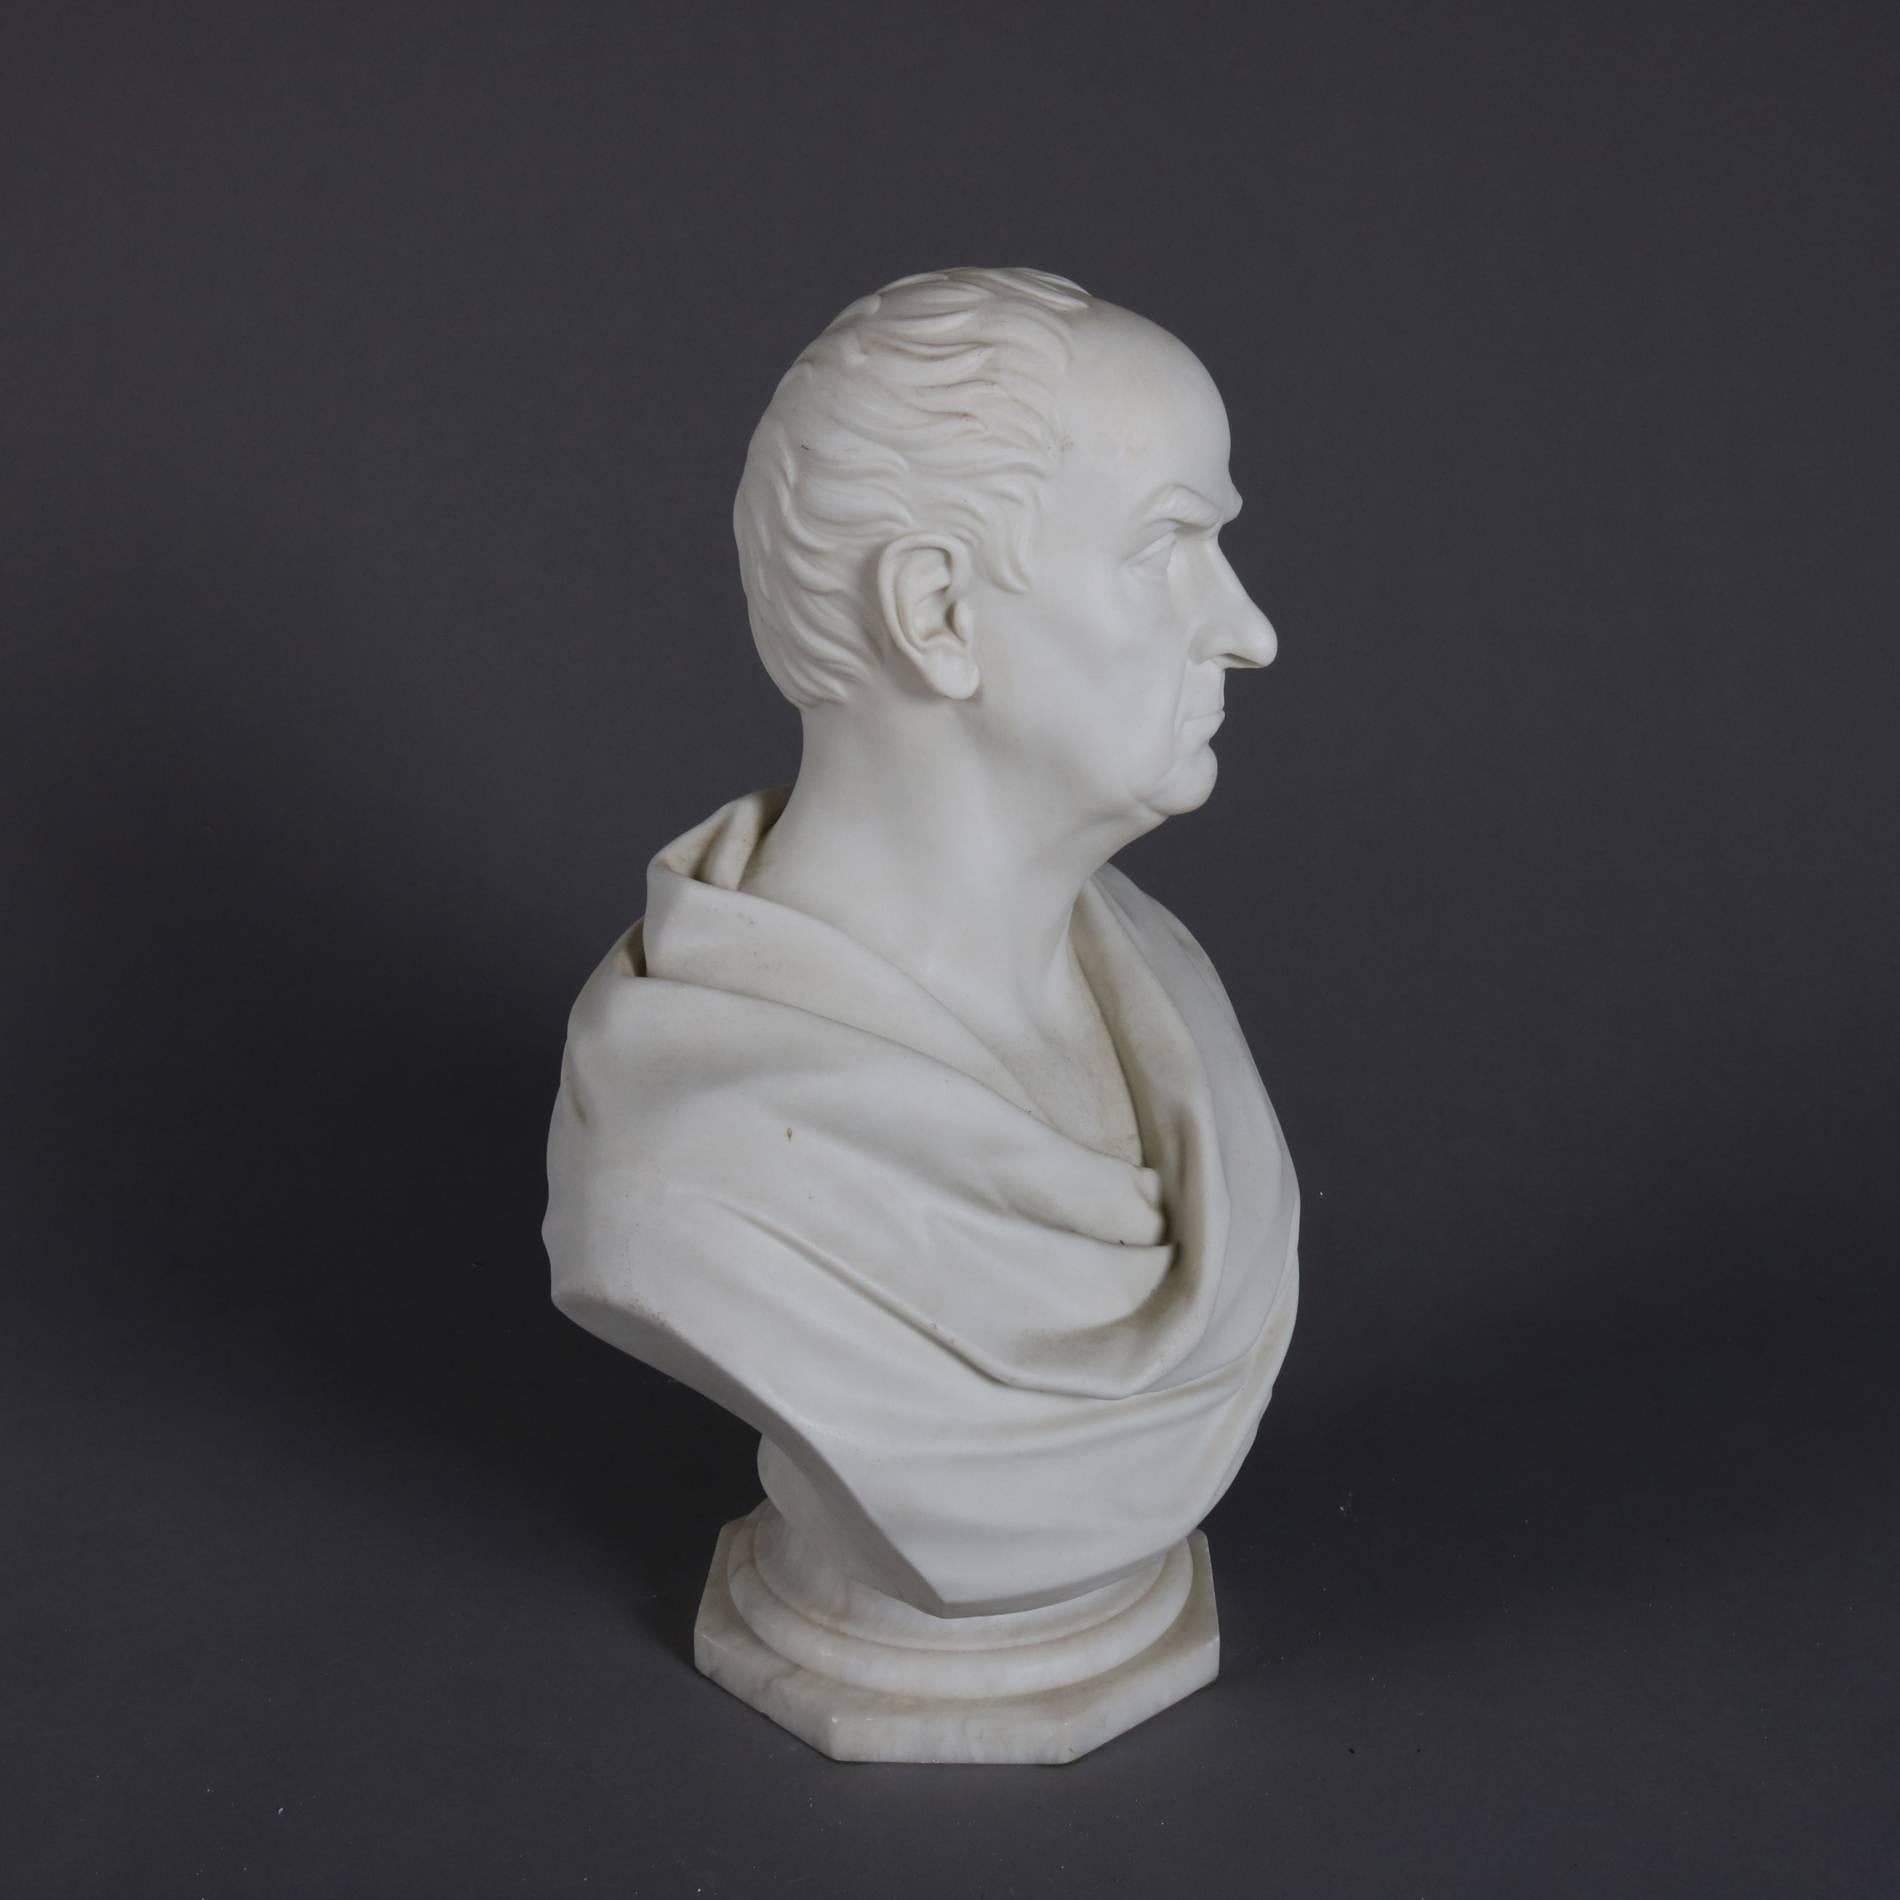 Porcelain Oversized English Copeland Parian Bust of Daniel Webster by King